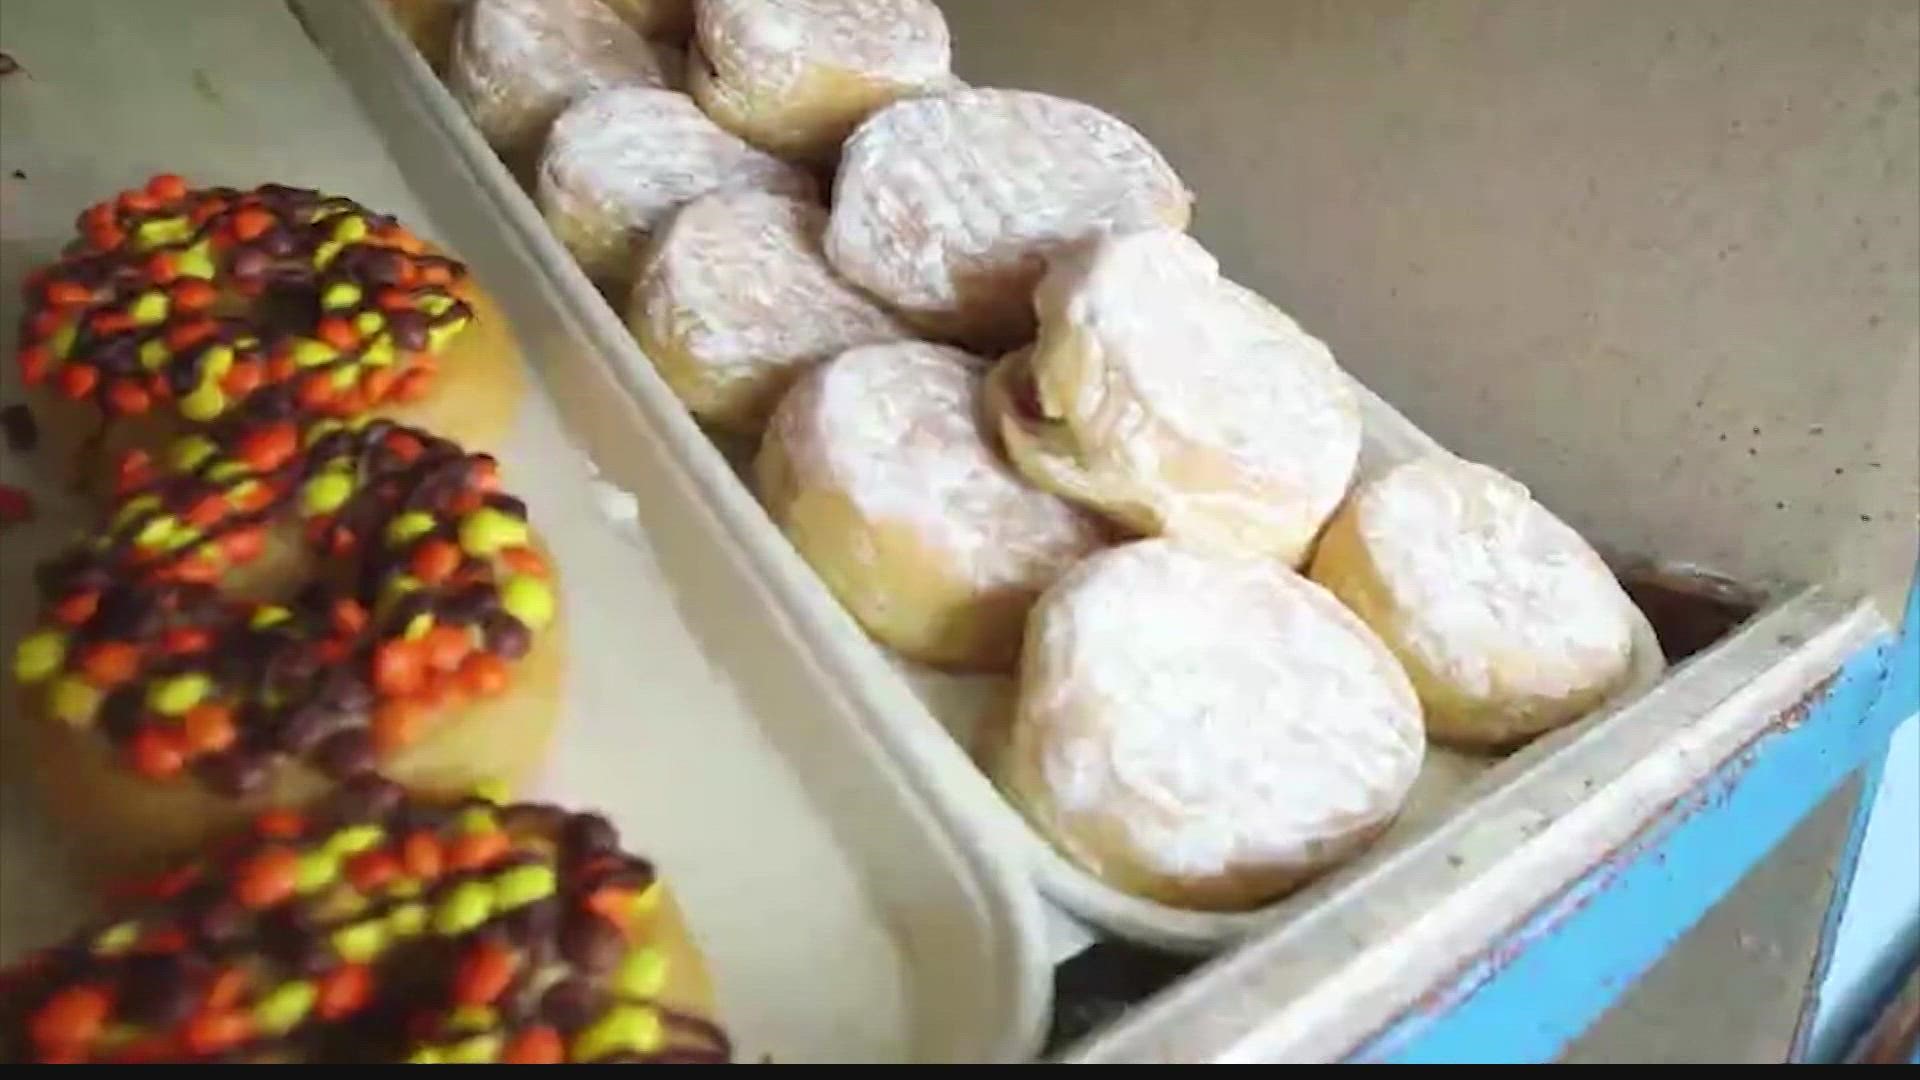 Learn about why we celebrate National Doughnut Day on June 3. Emma Jade and Emily Pritchard have the story.